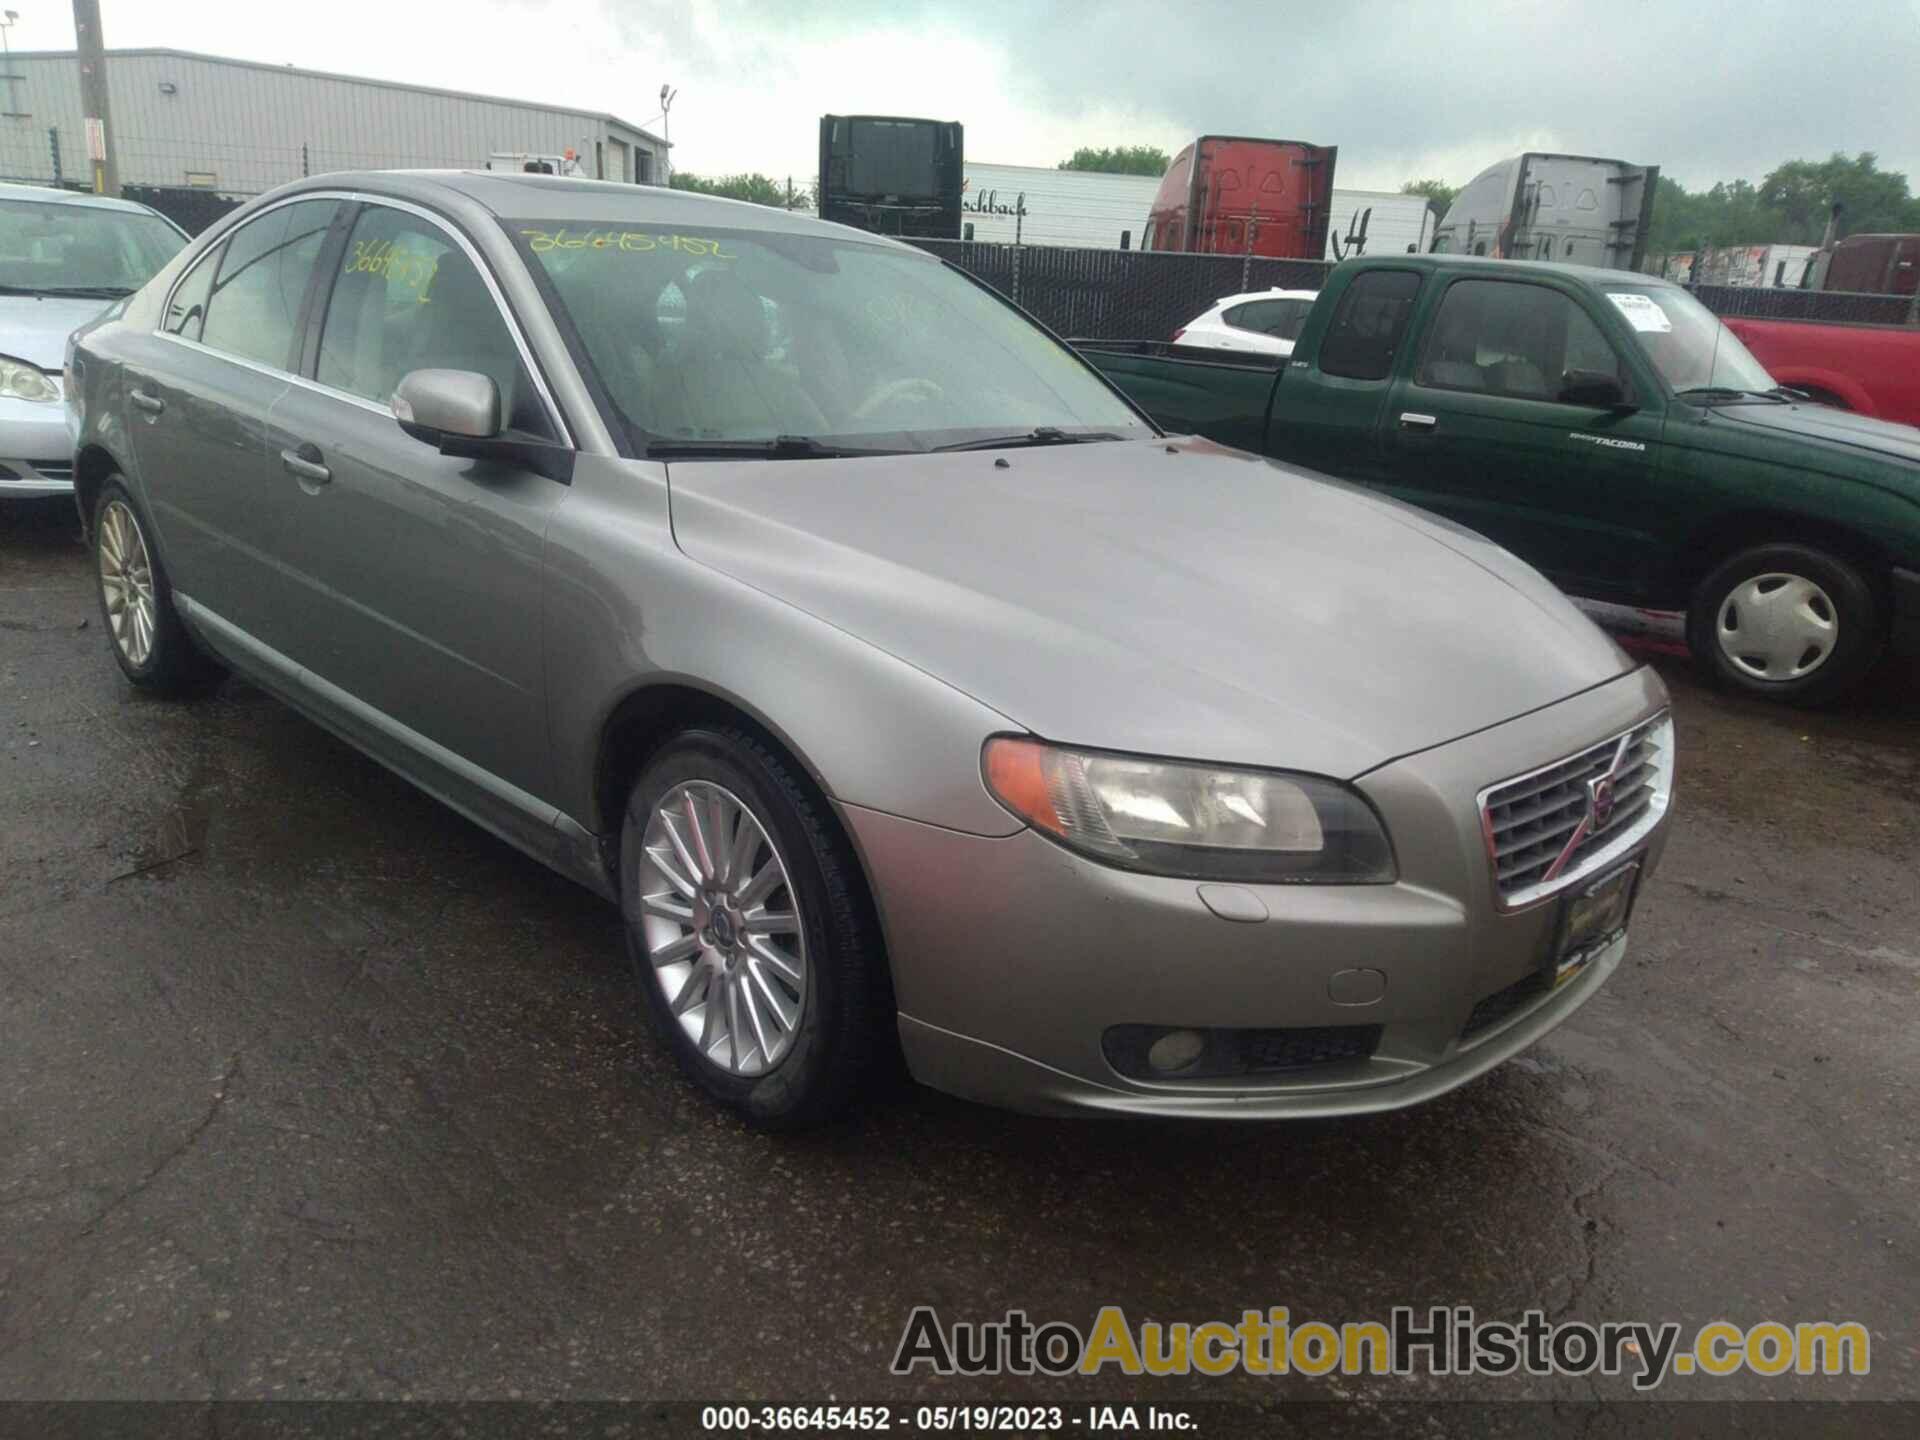 VOLVO S80 3.2, YV1AS982671030191